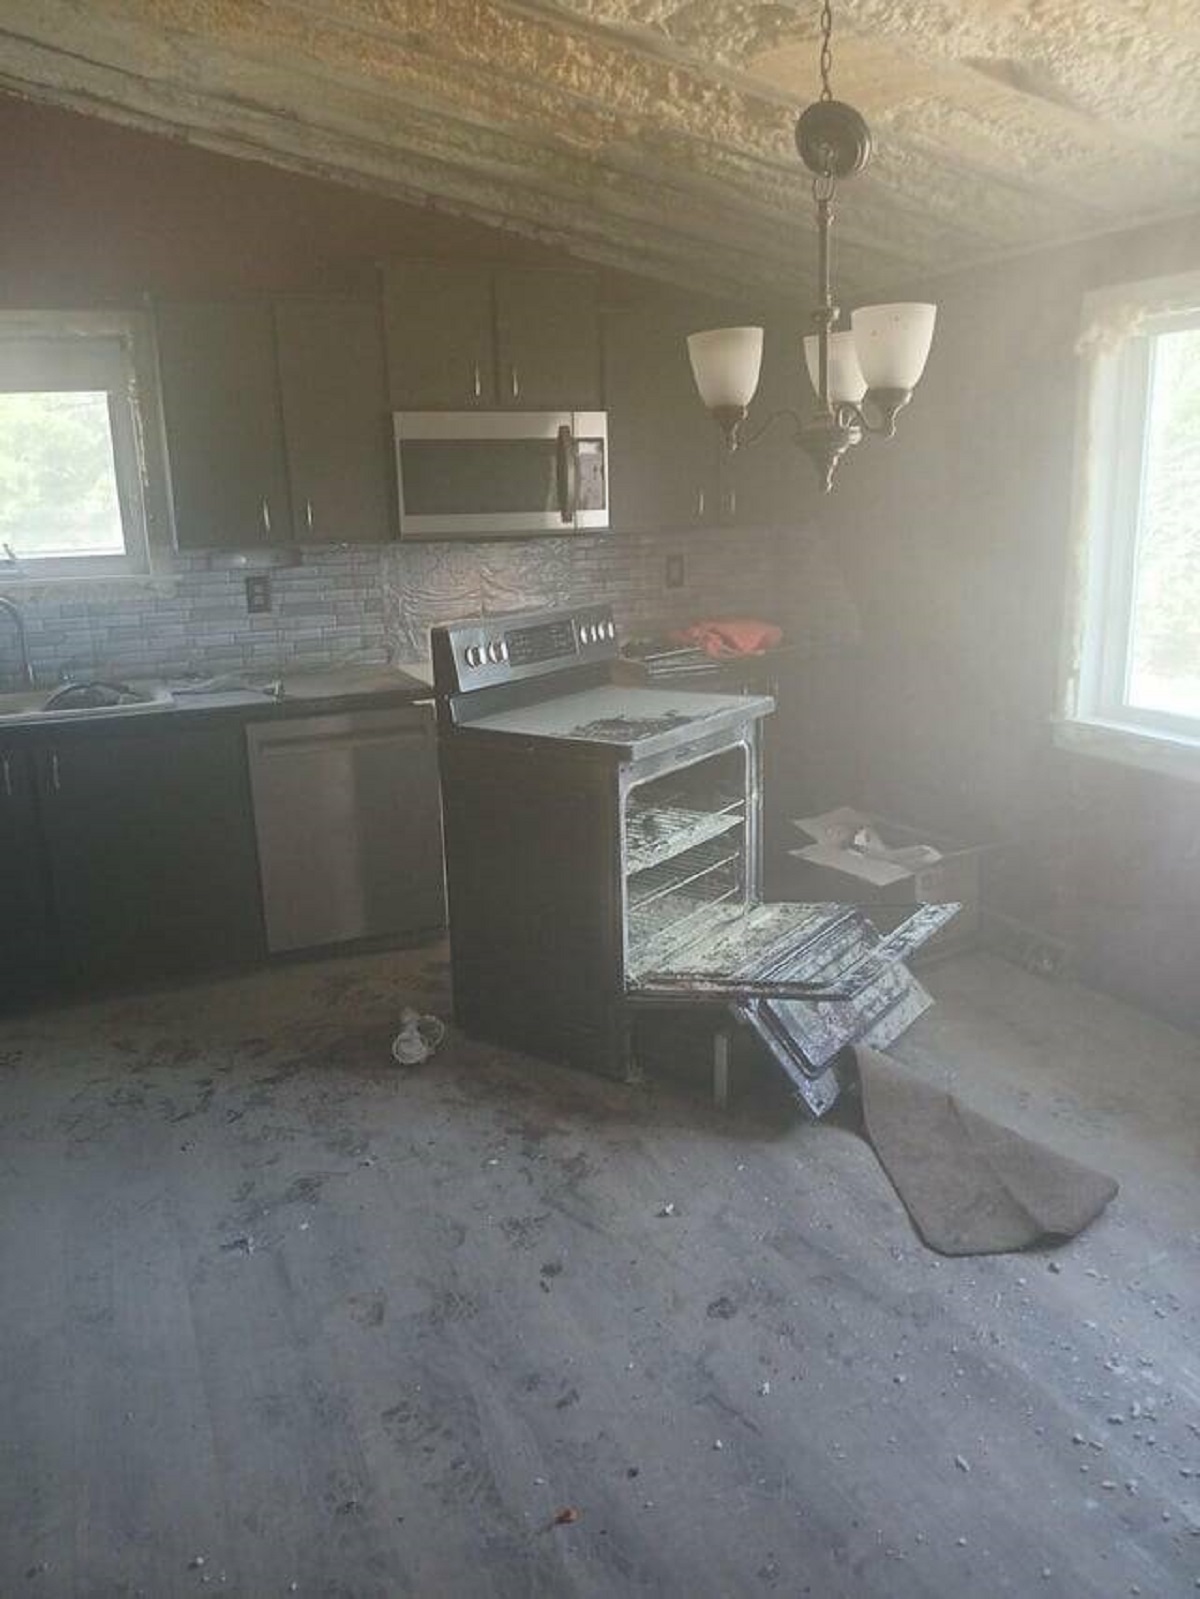 "Someone decided it was a good idea to use the oven to warm up expanding foam."